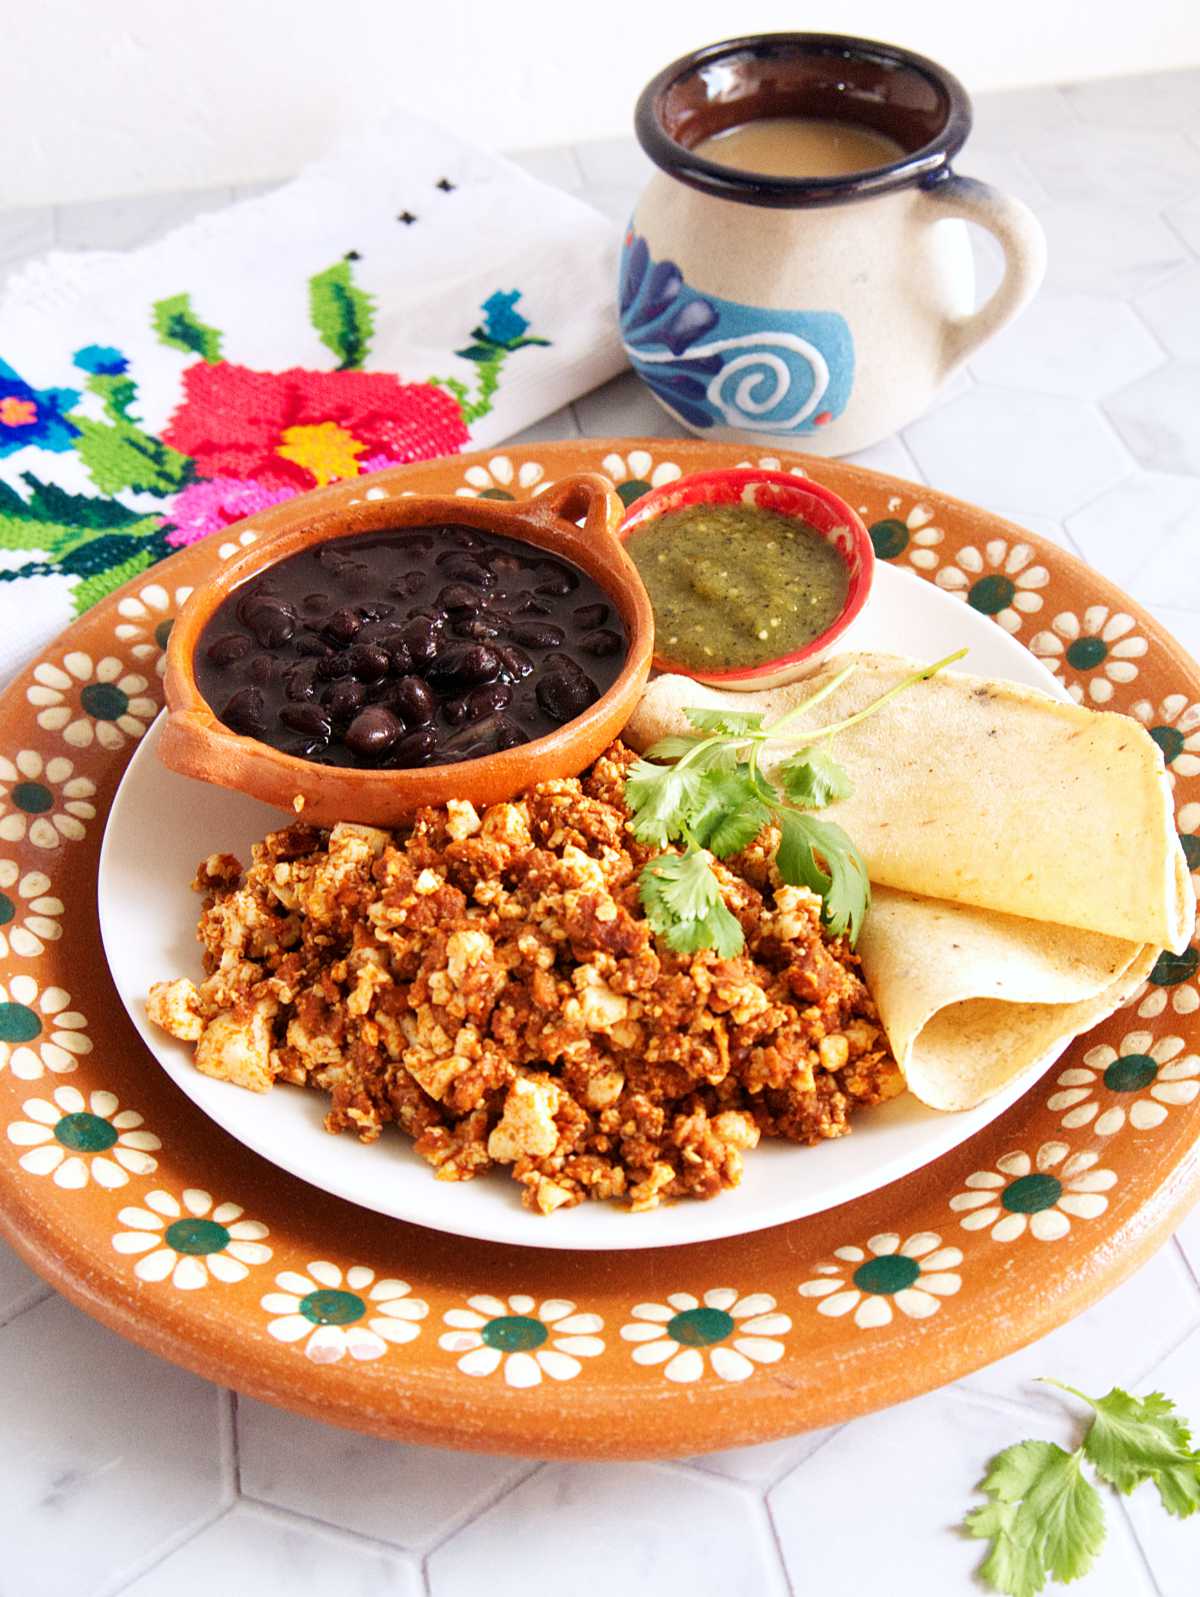 A decorative Mexican terracotta plate with a smaller white plate on top that's filled with vegan huevos con chorizo, corn tortillas, roasted salsa verde, and a small bowl filled with black beans. There's a mug in the background filled with cafe con leche.